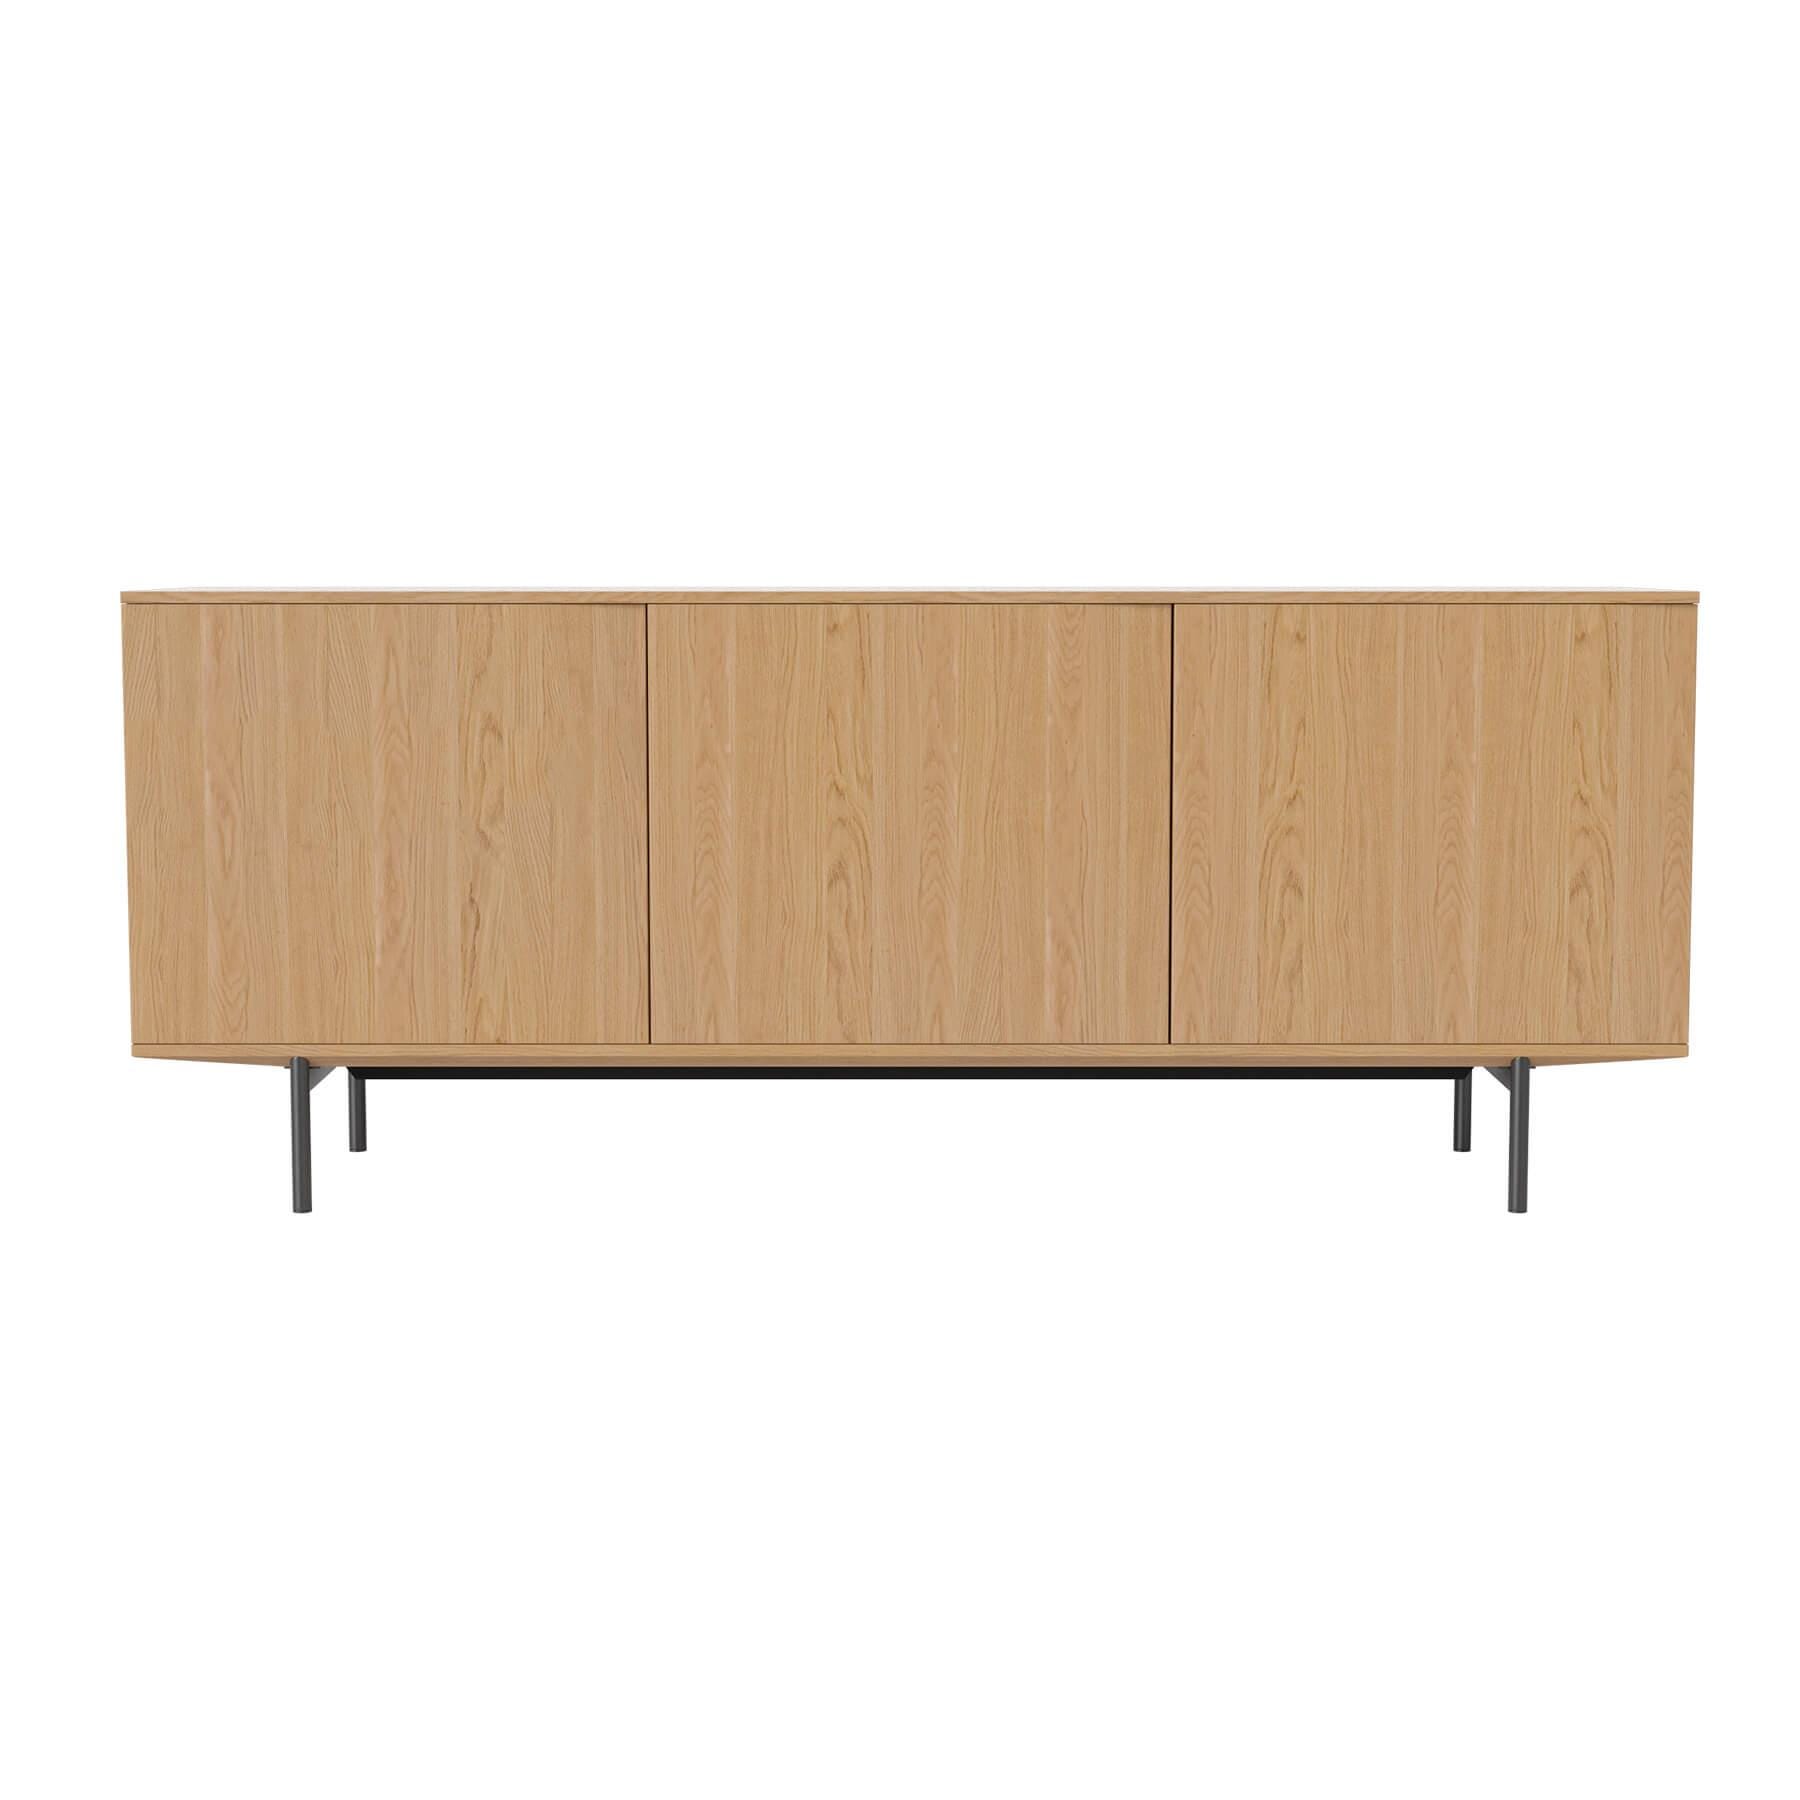 Bolia Silent Sideboard Oiled Oak Light Wood Designer Furniture From Holloways Of Ludlow